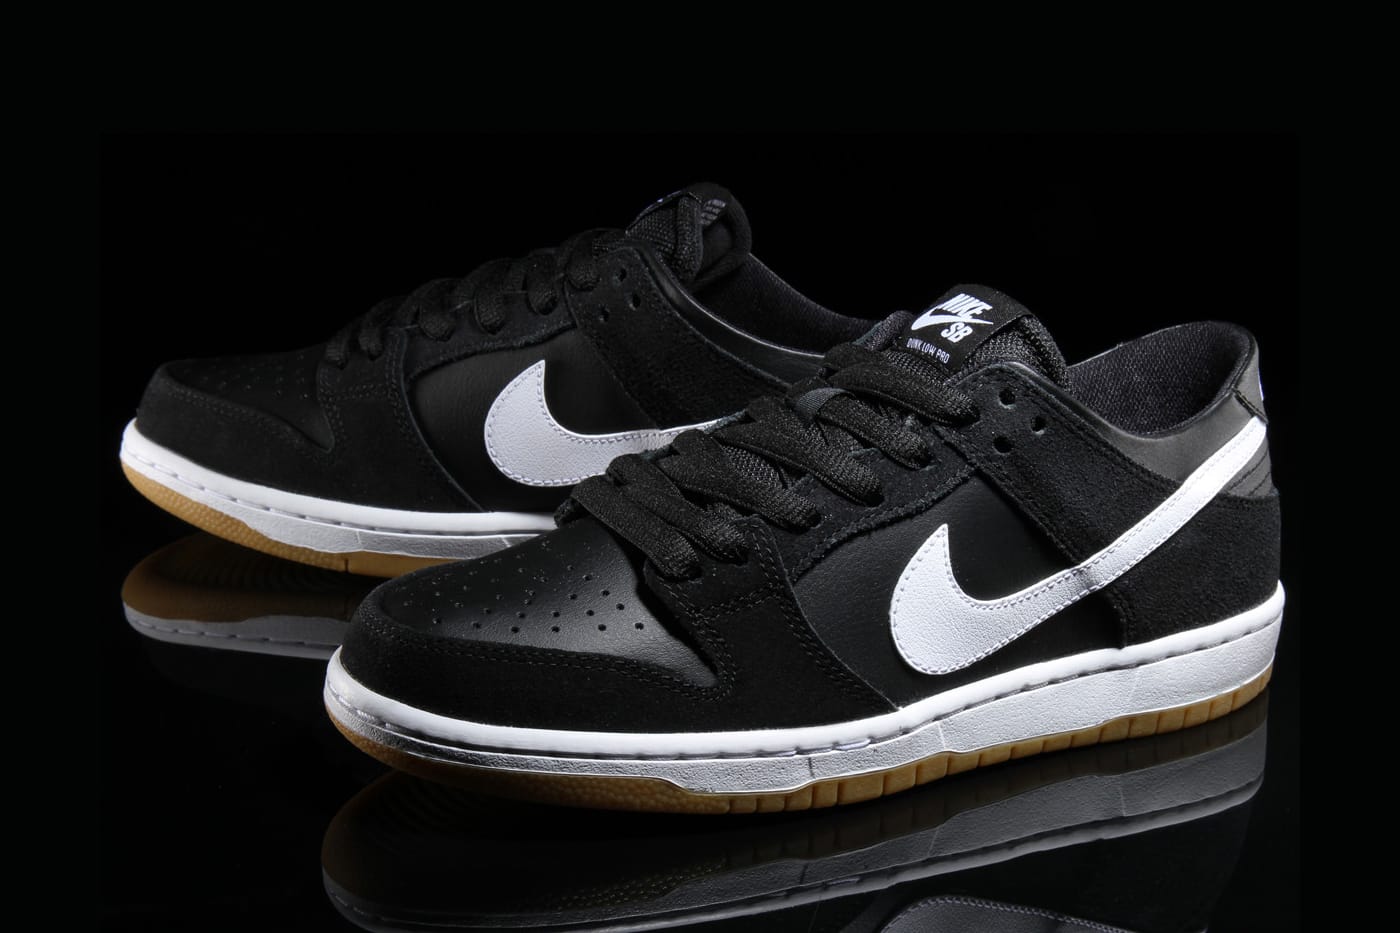 Nike SB Dunk Low Pro in Classic Black/White/Gum Colorway | Hypebeast